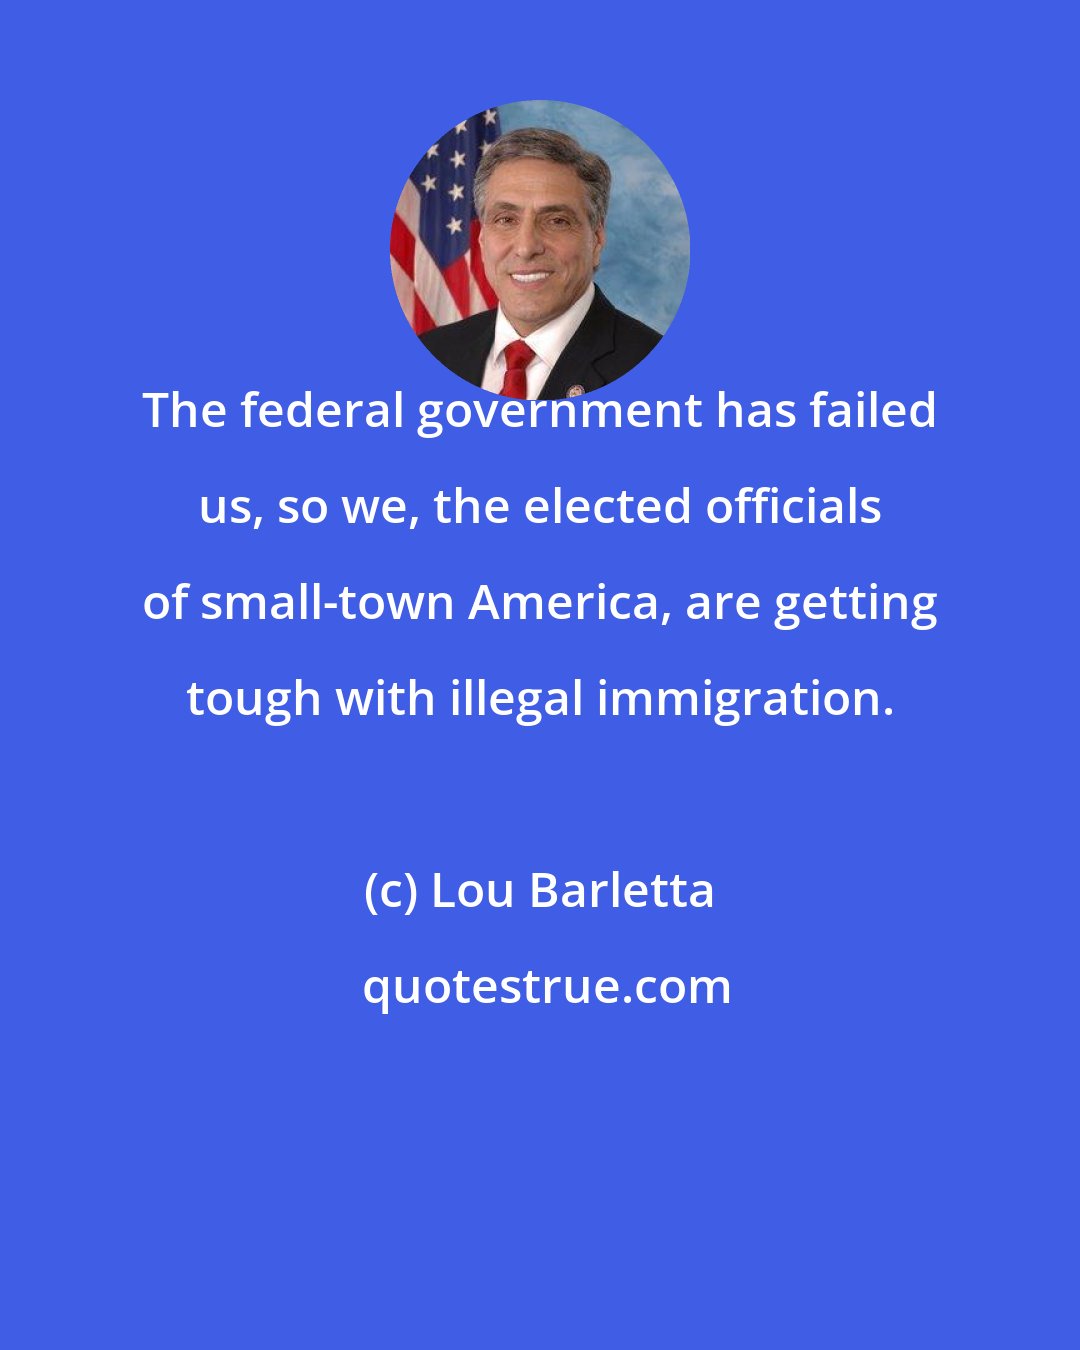 Lou Barletta: The federal government has failed us, so we, the elected officials of small-town America, are getting tough with illegal immigration.